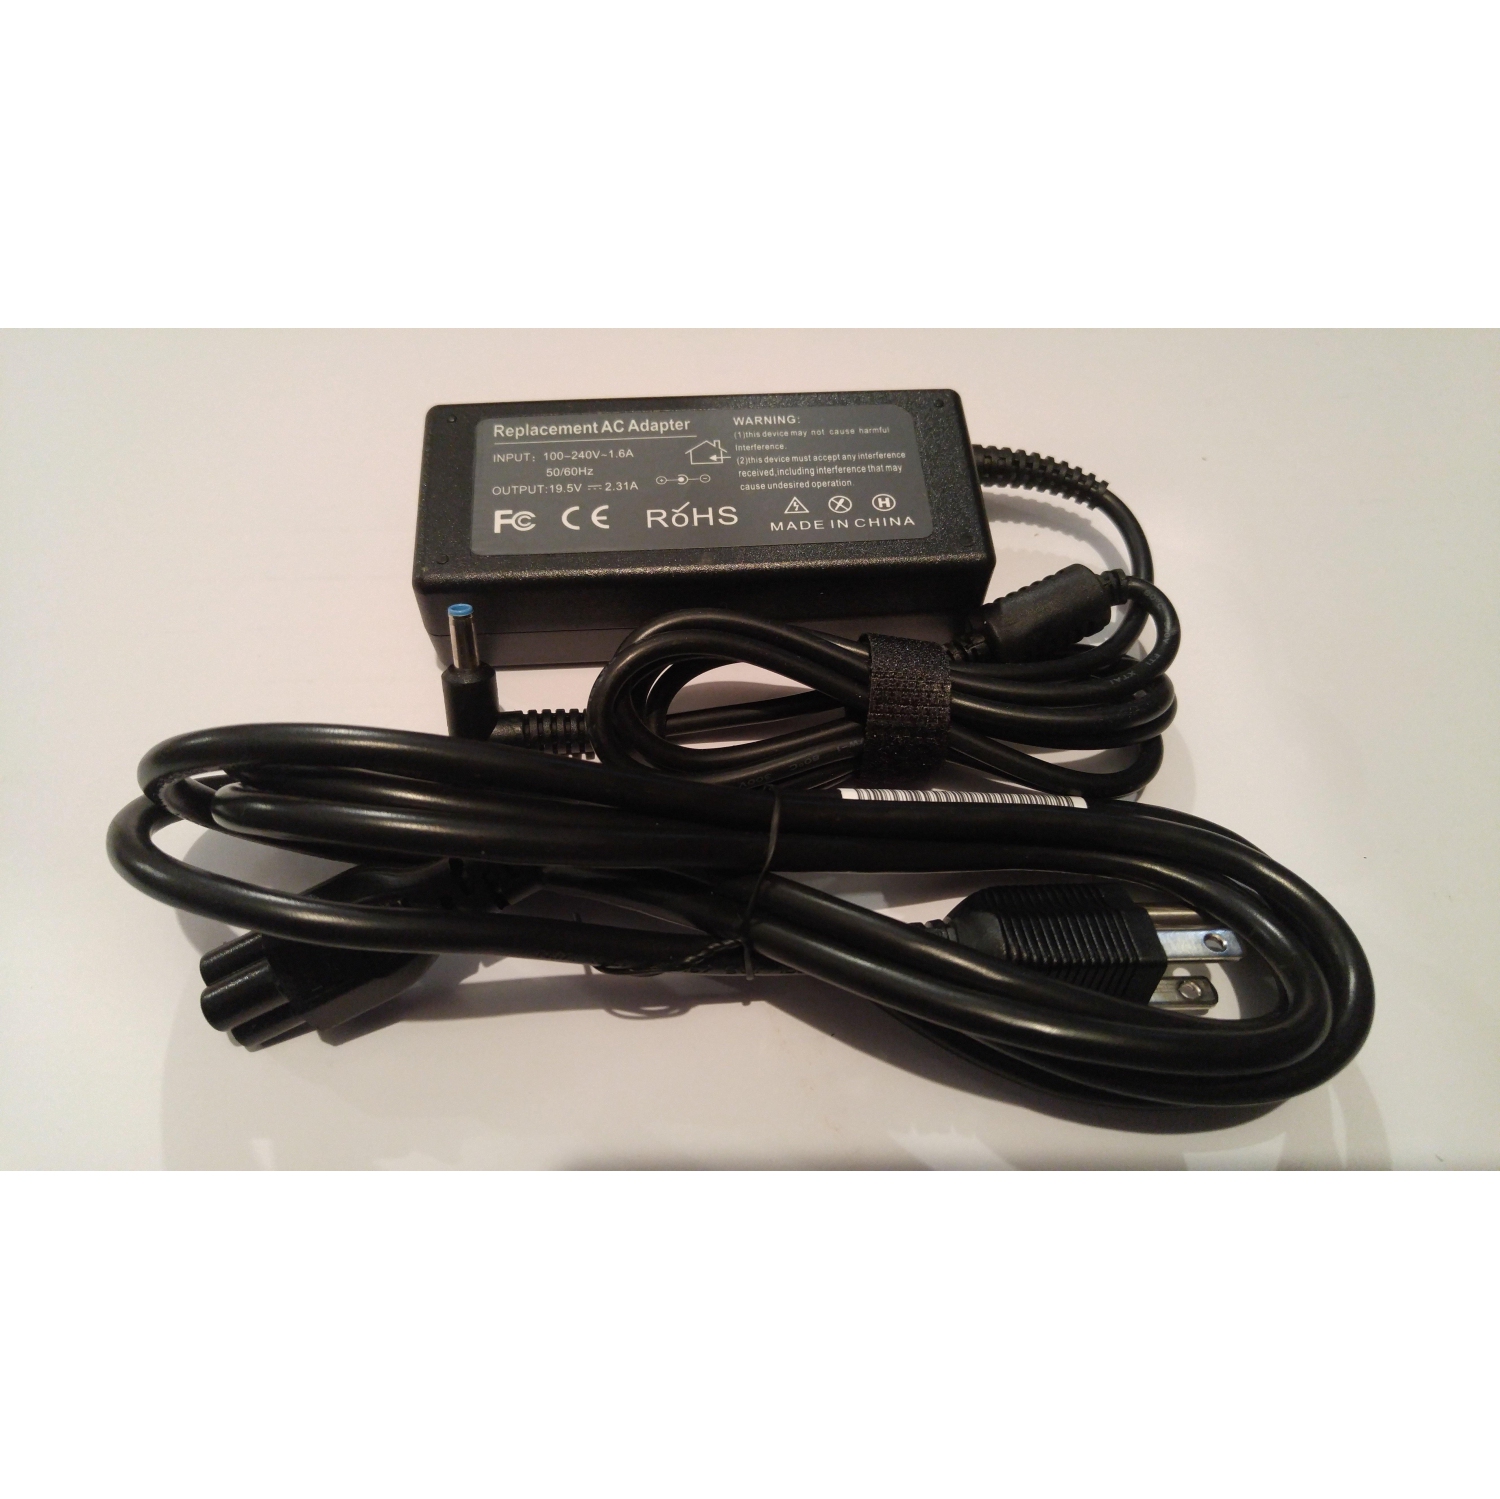 New Compatible HP EliteBook Folio 1040 G1 1040 G2 1040 G3 AC Adapter Charger 45W